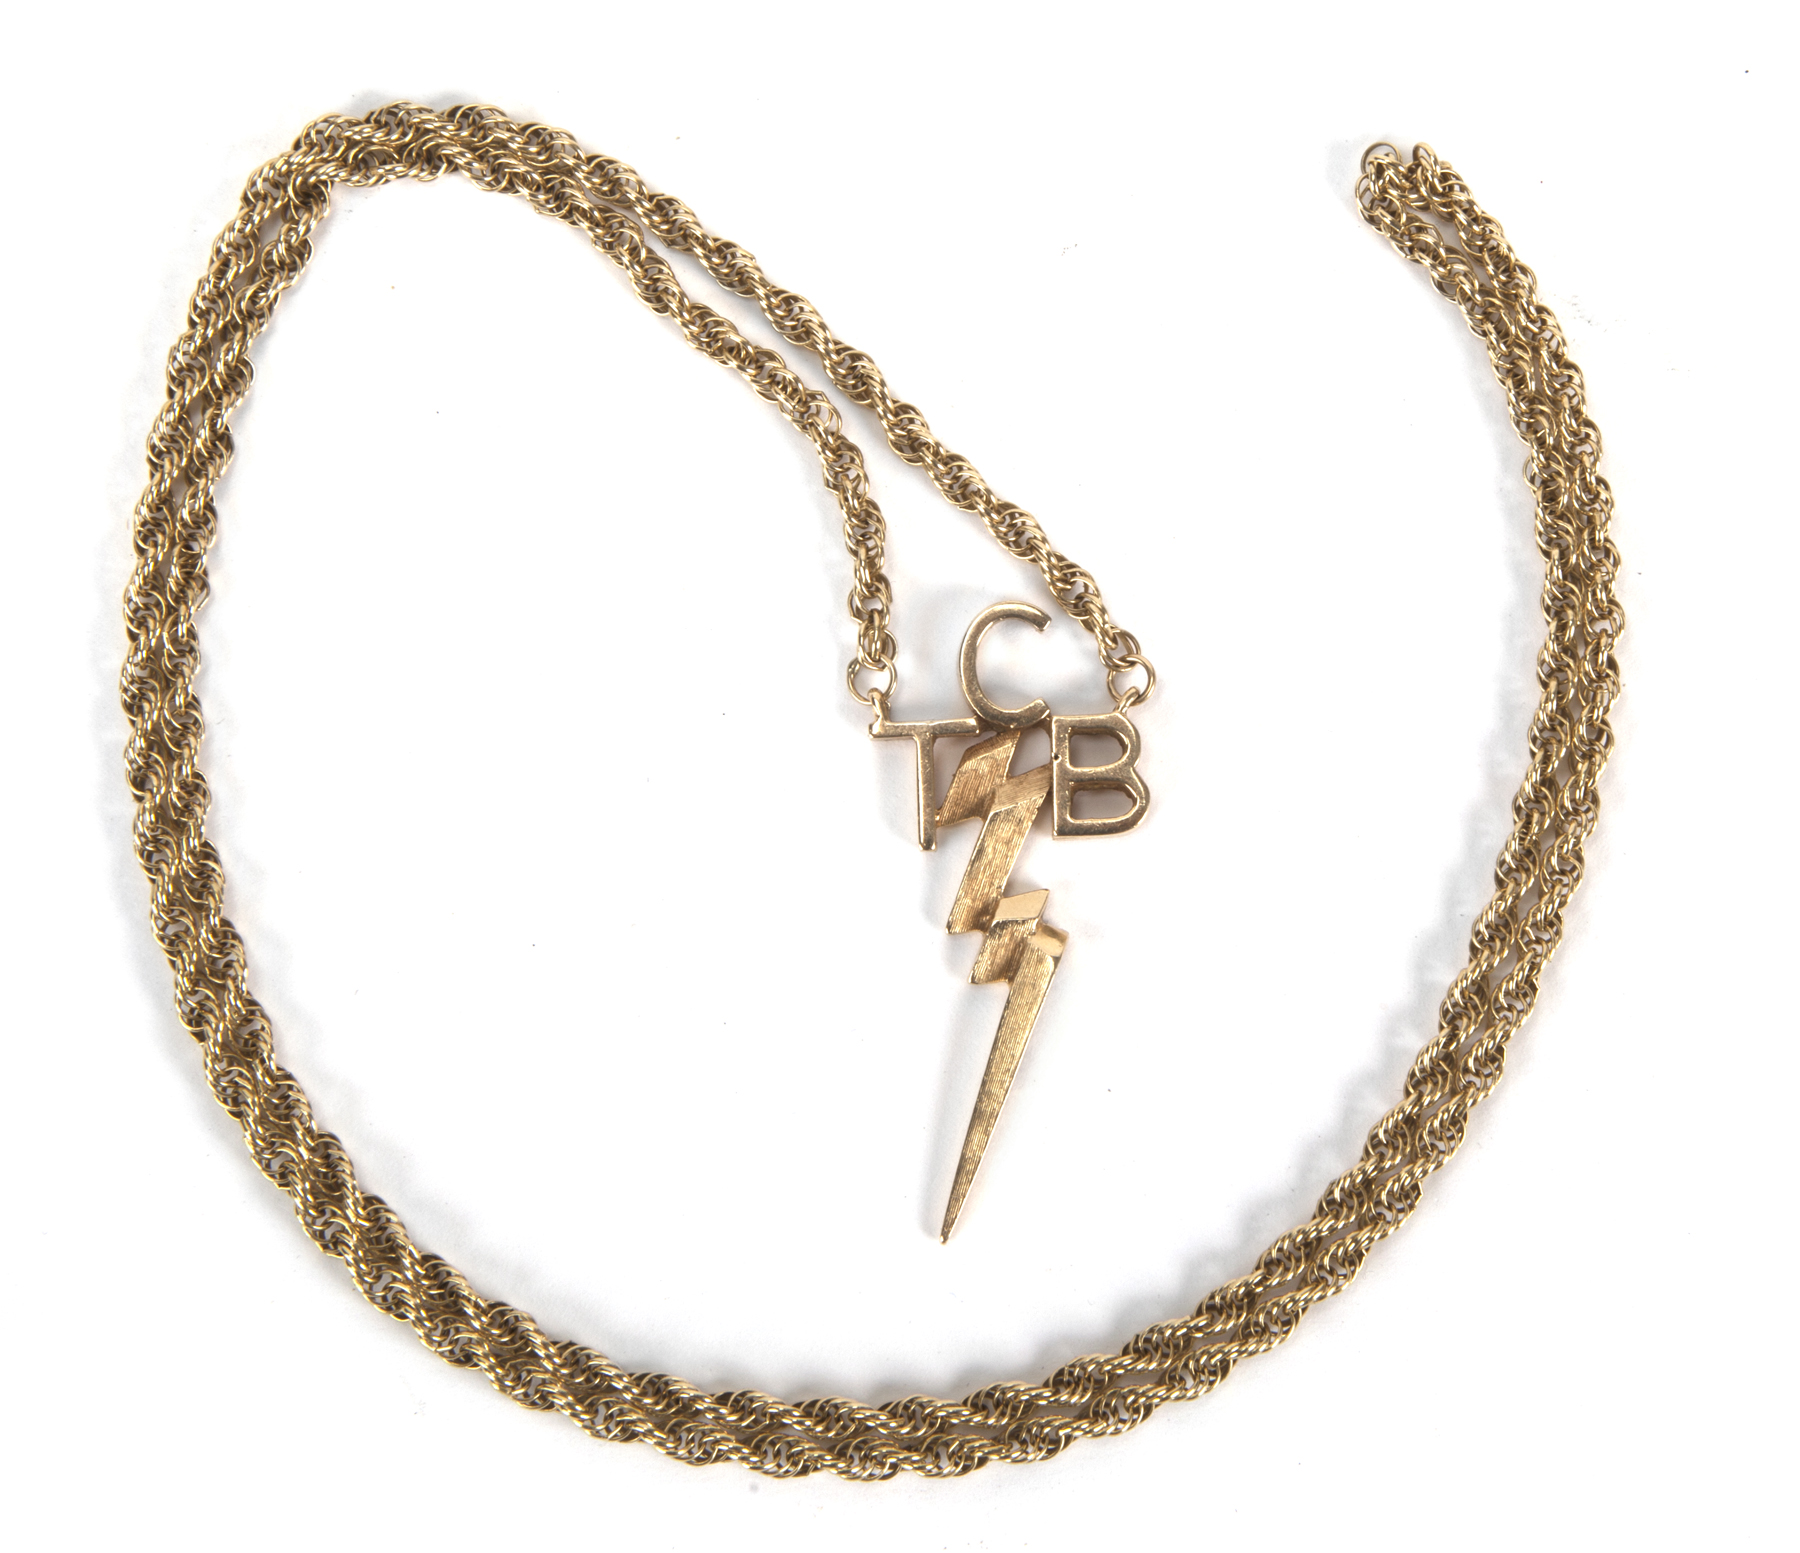 A TCB necklace that Elvis Presley gave to Sonny West per TheHotBid.com.